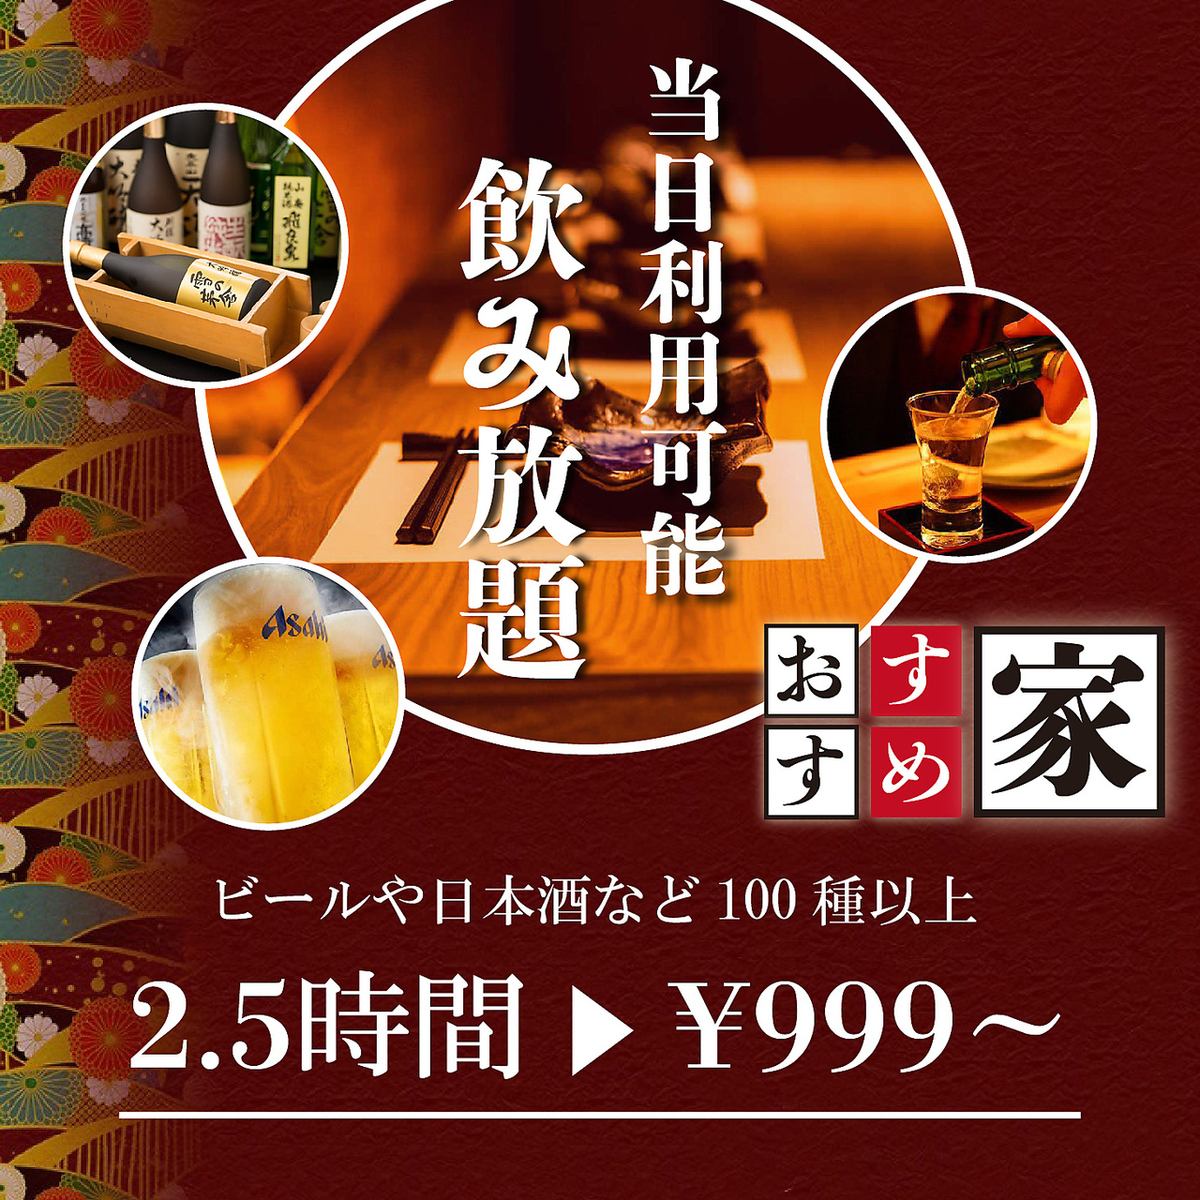 Same-day OK 2.5 hour all-you-can-drink for 980 yen. Now is a great deal!! [5x bonus points]